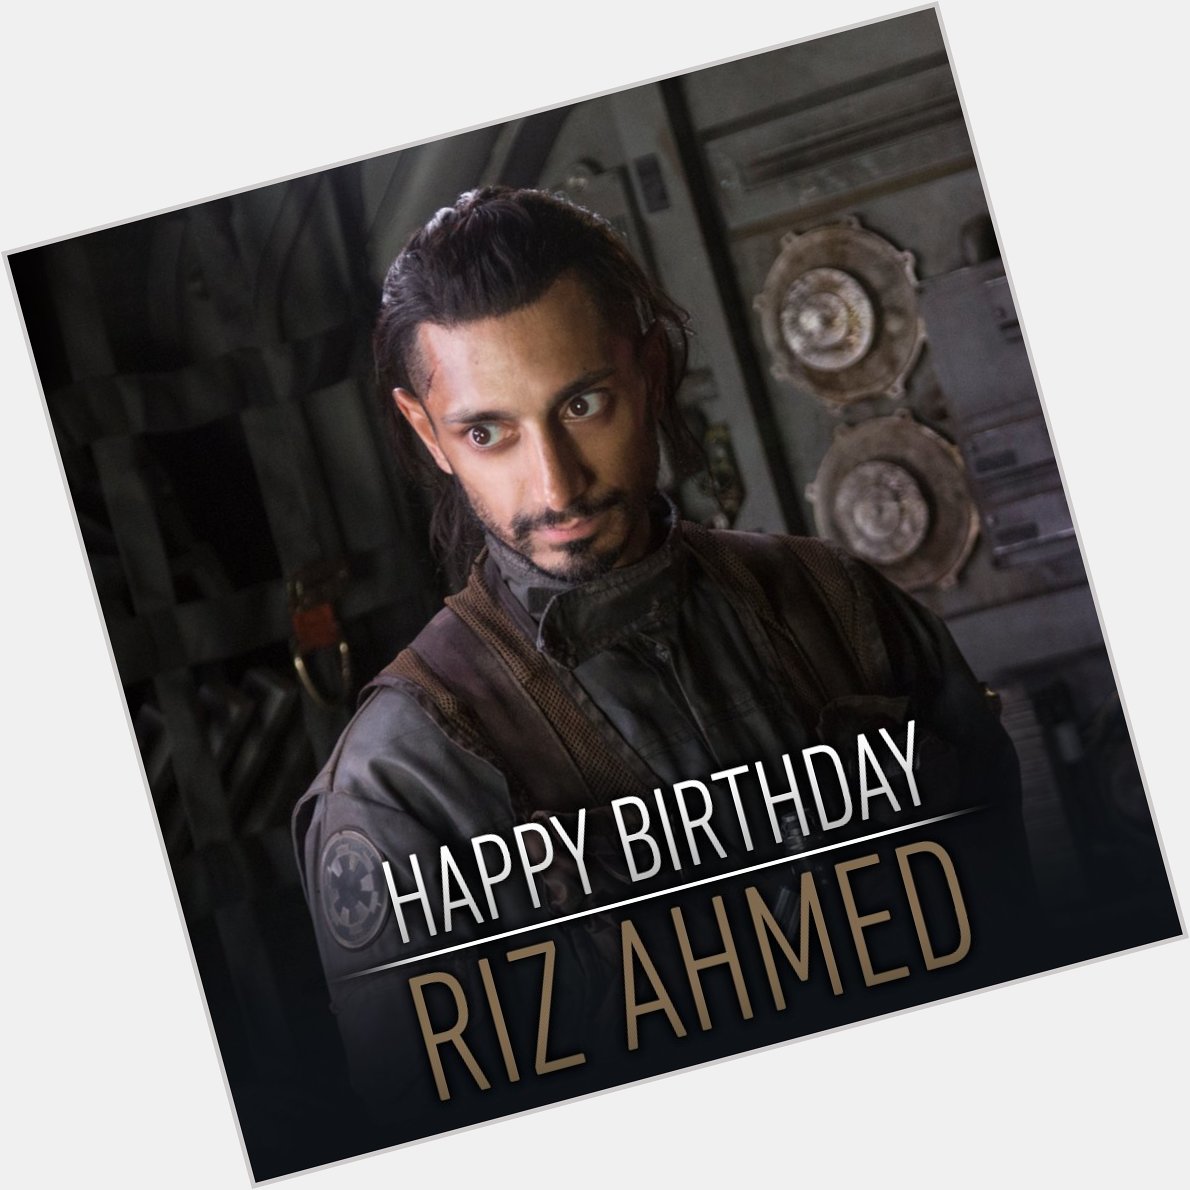 The call sign is birthday. Happy birthday. Send your best wishes to Rogue One\s Riz Ahmed 